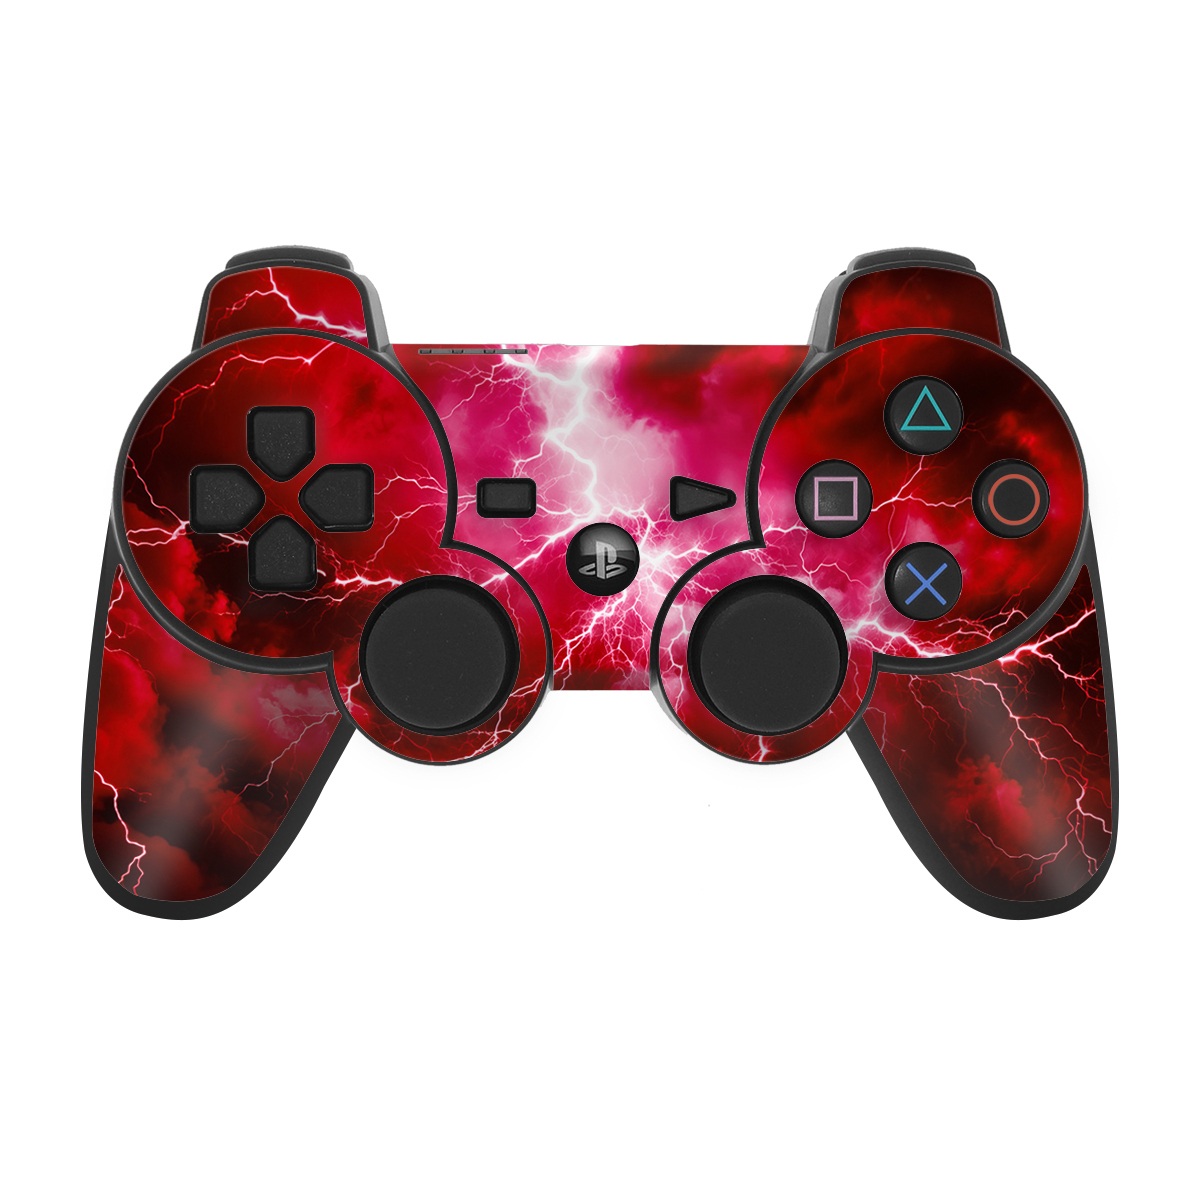 PS3 Controller Skin design of Thunder, Atmosphere, Sky, Light, Purple, Lighting, Water, Thunderstorm, Electricity, Pink, with black, red colors